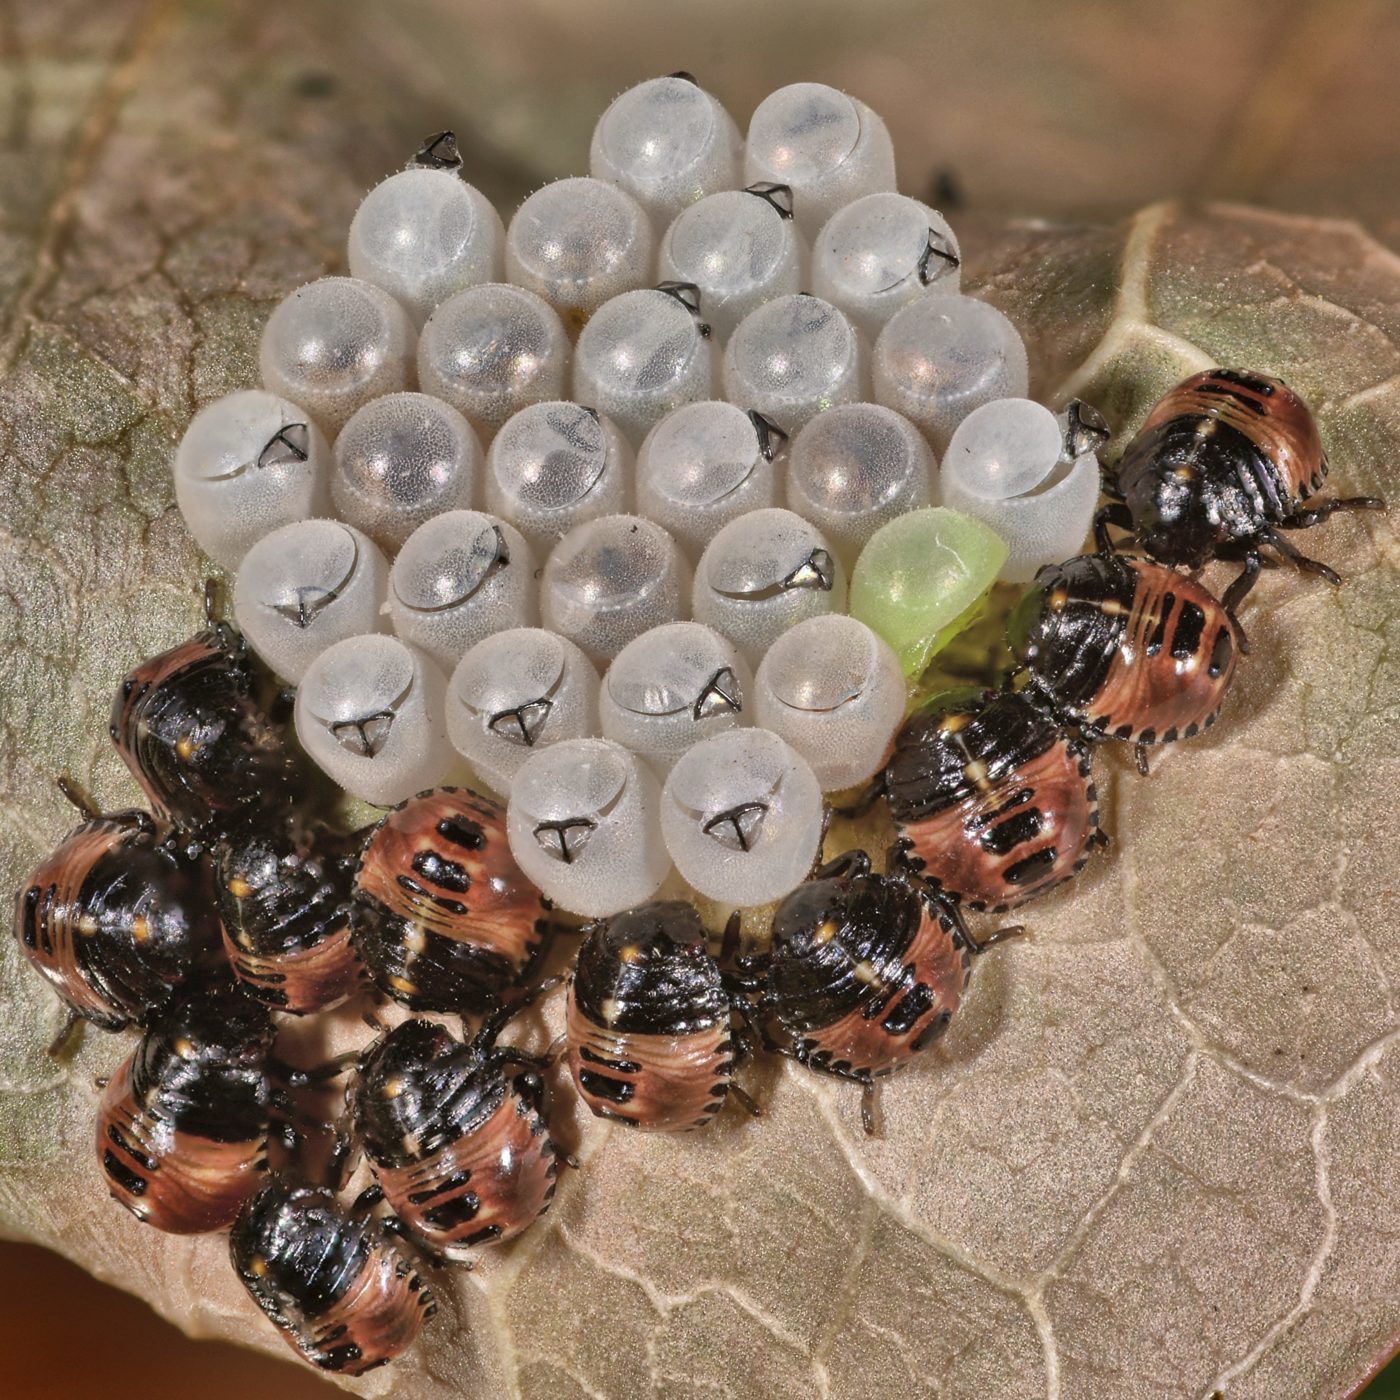 Ten Common green shieldbugs, Palomena prasina, are emerging from their eggs, 17 have emerged leaving egg cases and beaks, and one has failed and is still green.